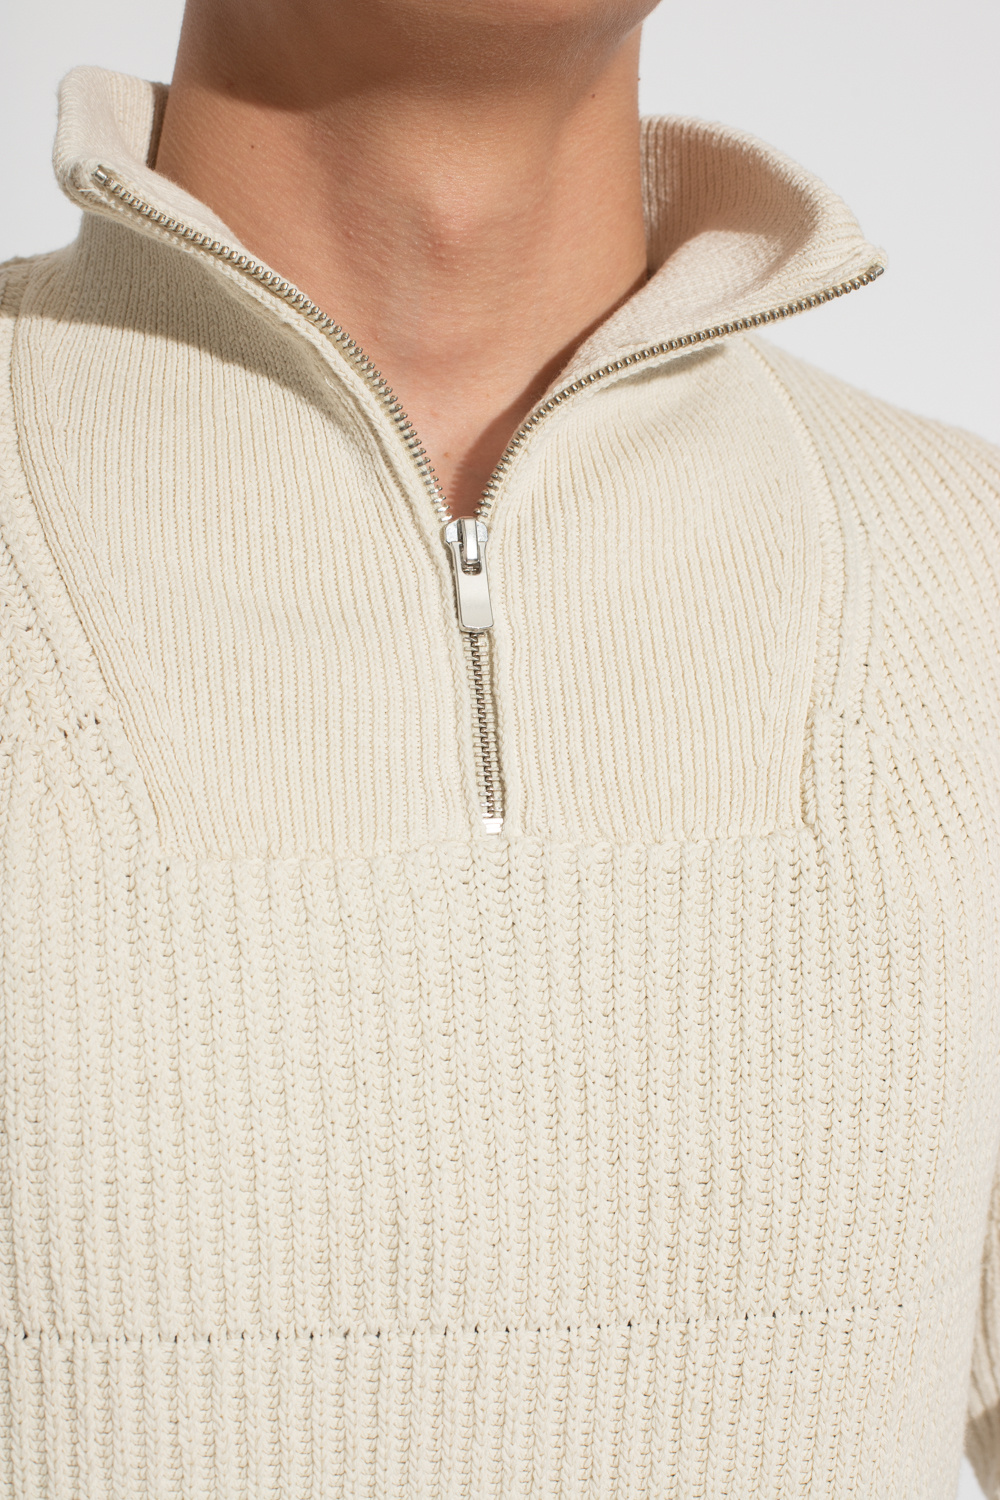 Jacquemus ‘Doce’ sweater with standing collar